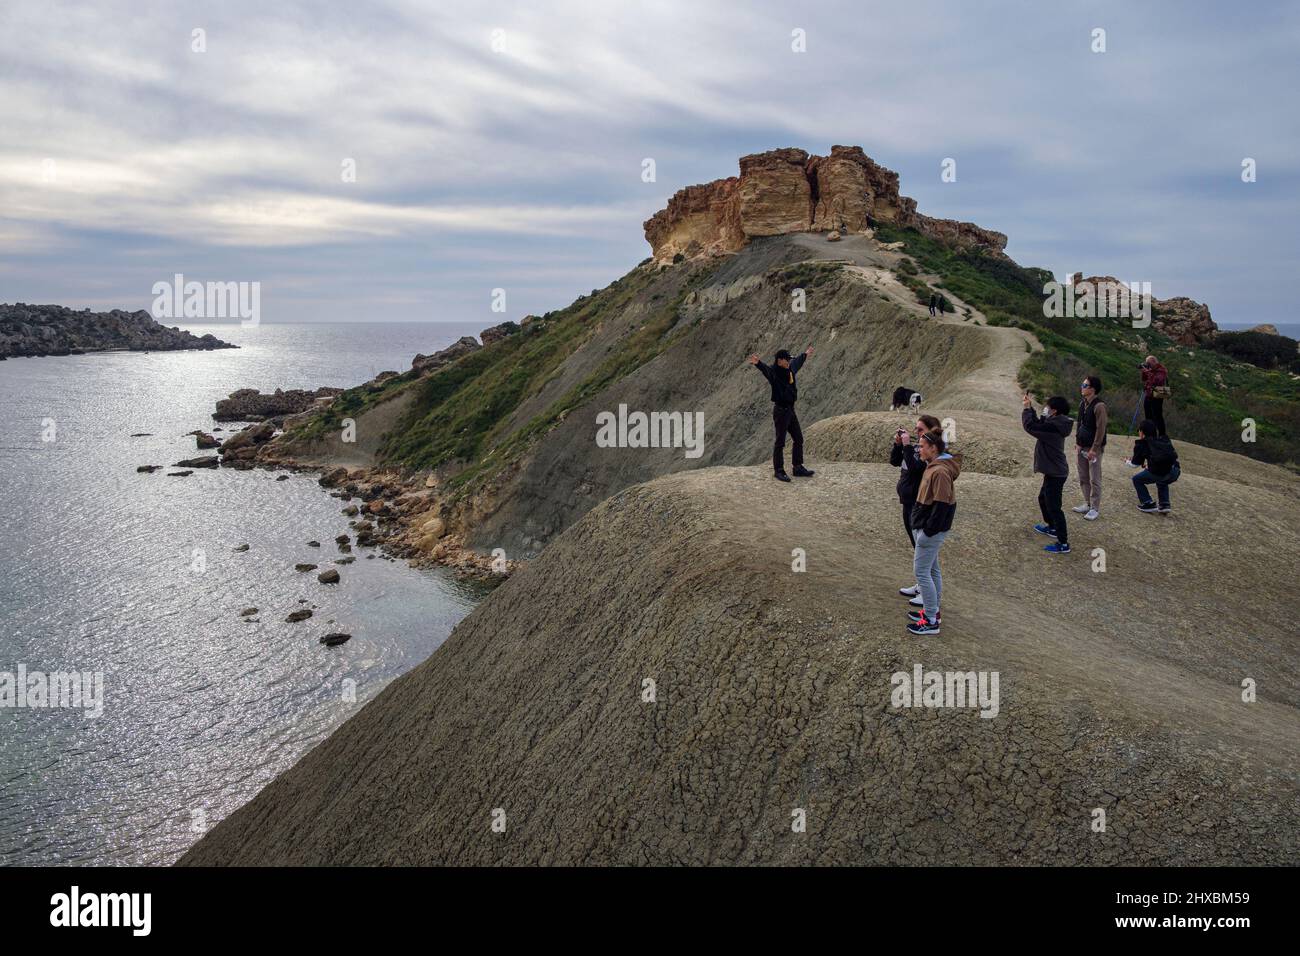 Tourists taking photographs on top of the clay cliffs at Qarraba Bay, Malta Stock Photo